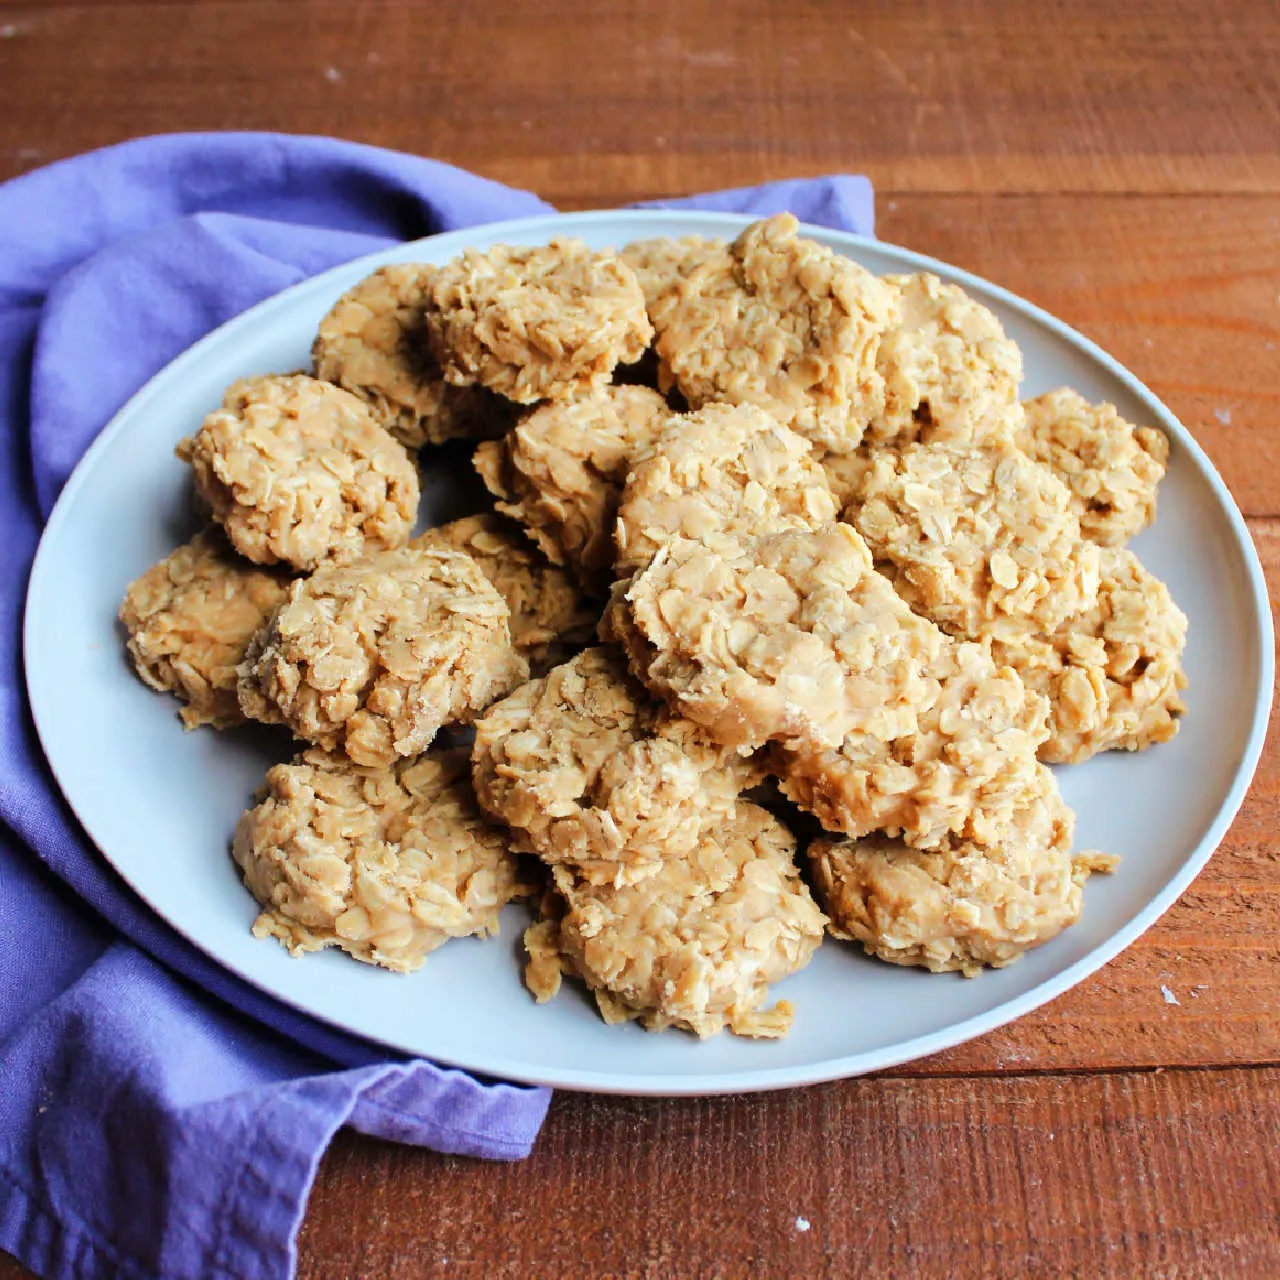 Serving plate loaded with no bake peanut butter cookies with oatmeal.